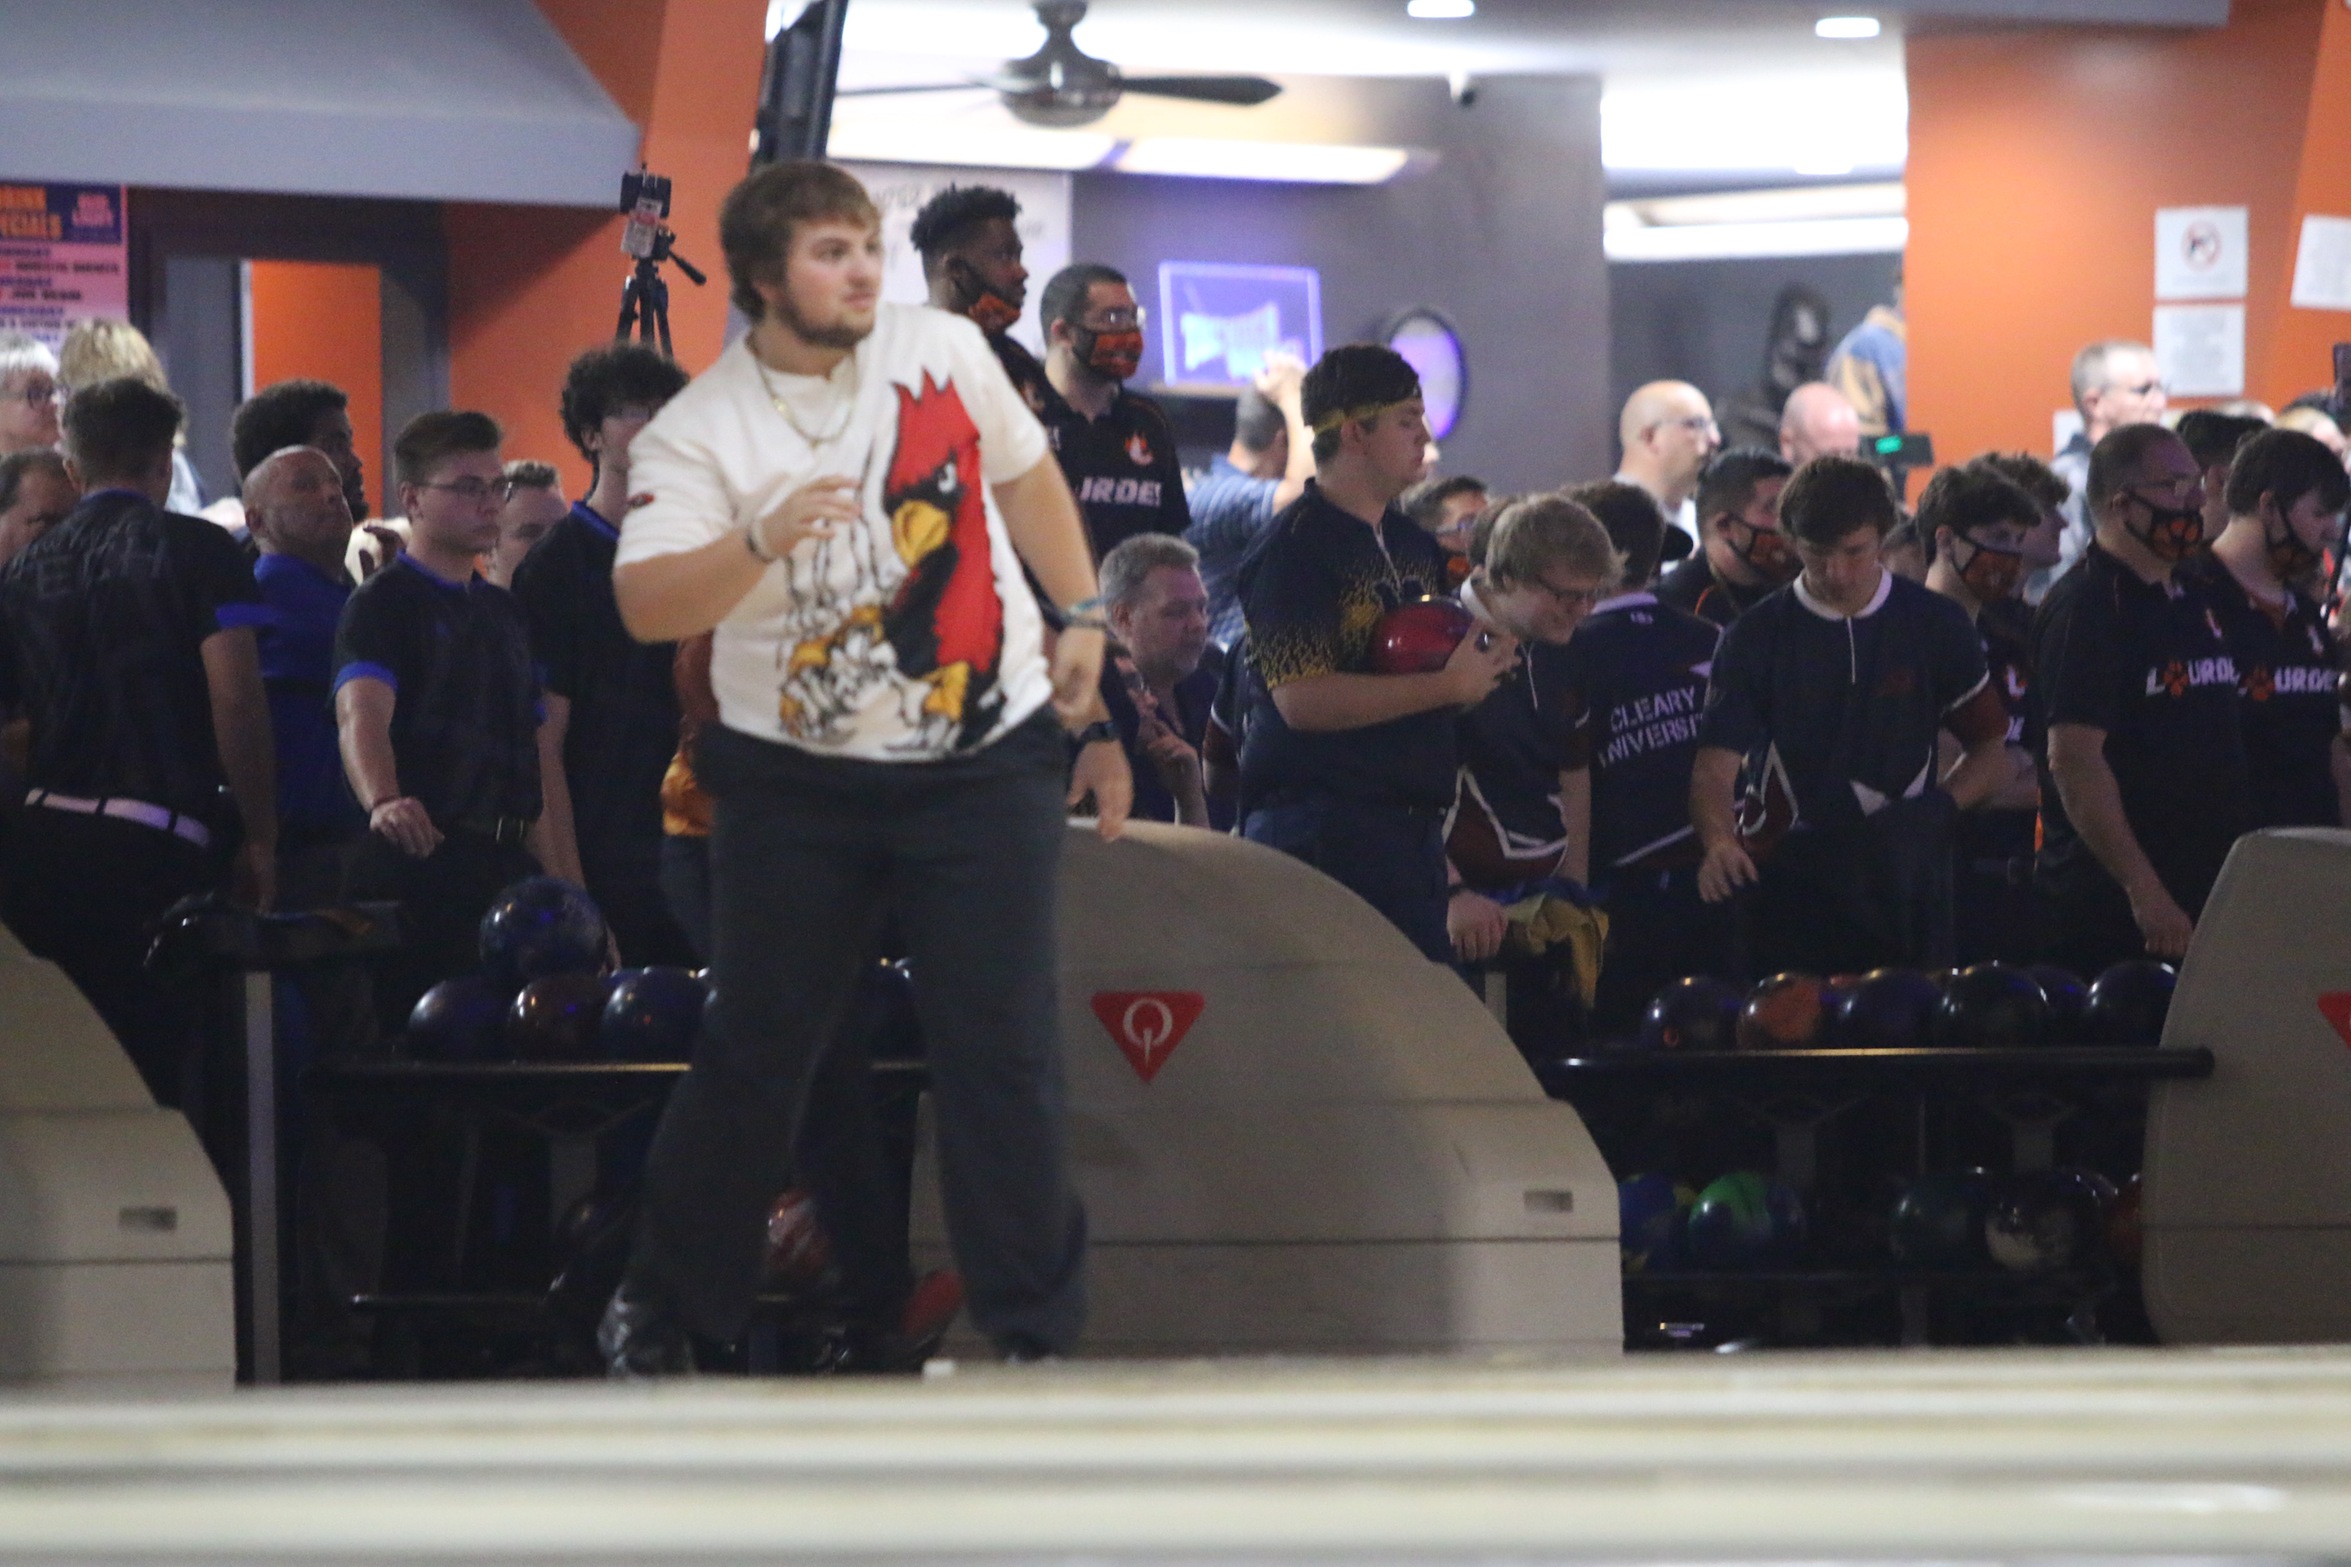 Men's Bowling finishes in 5th at Collegiate Shoot Out